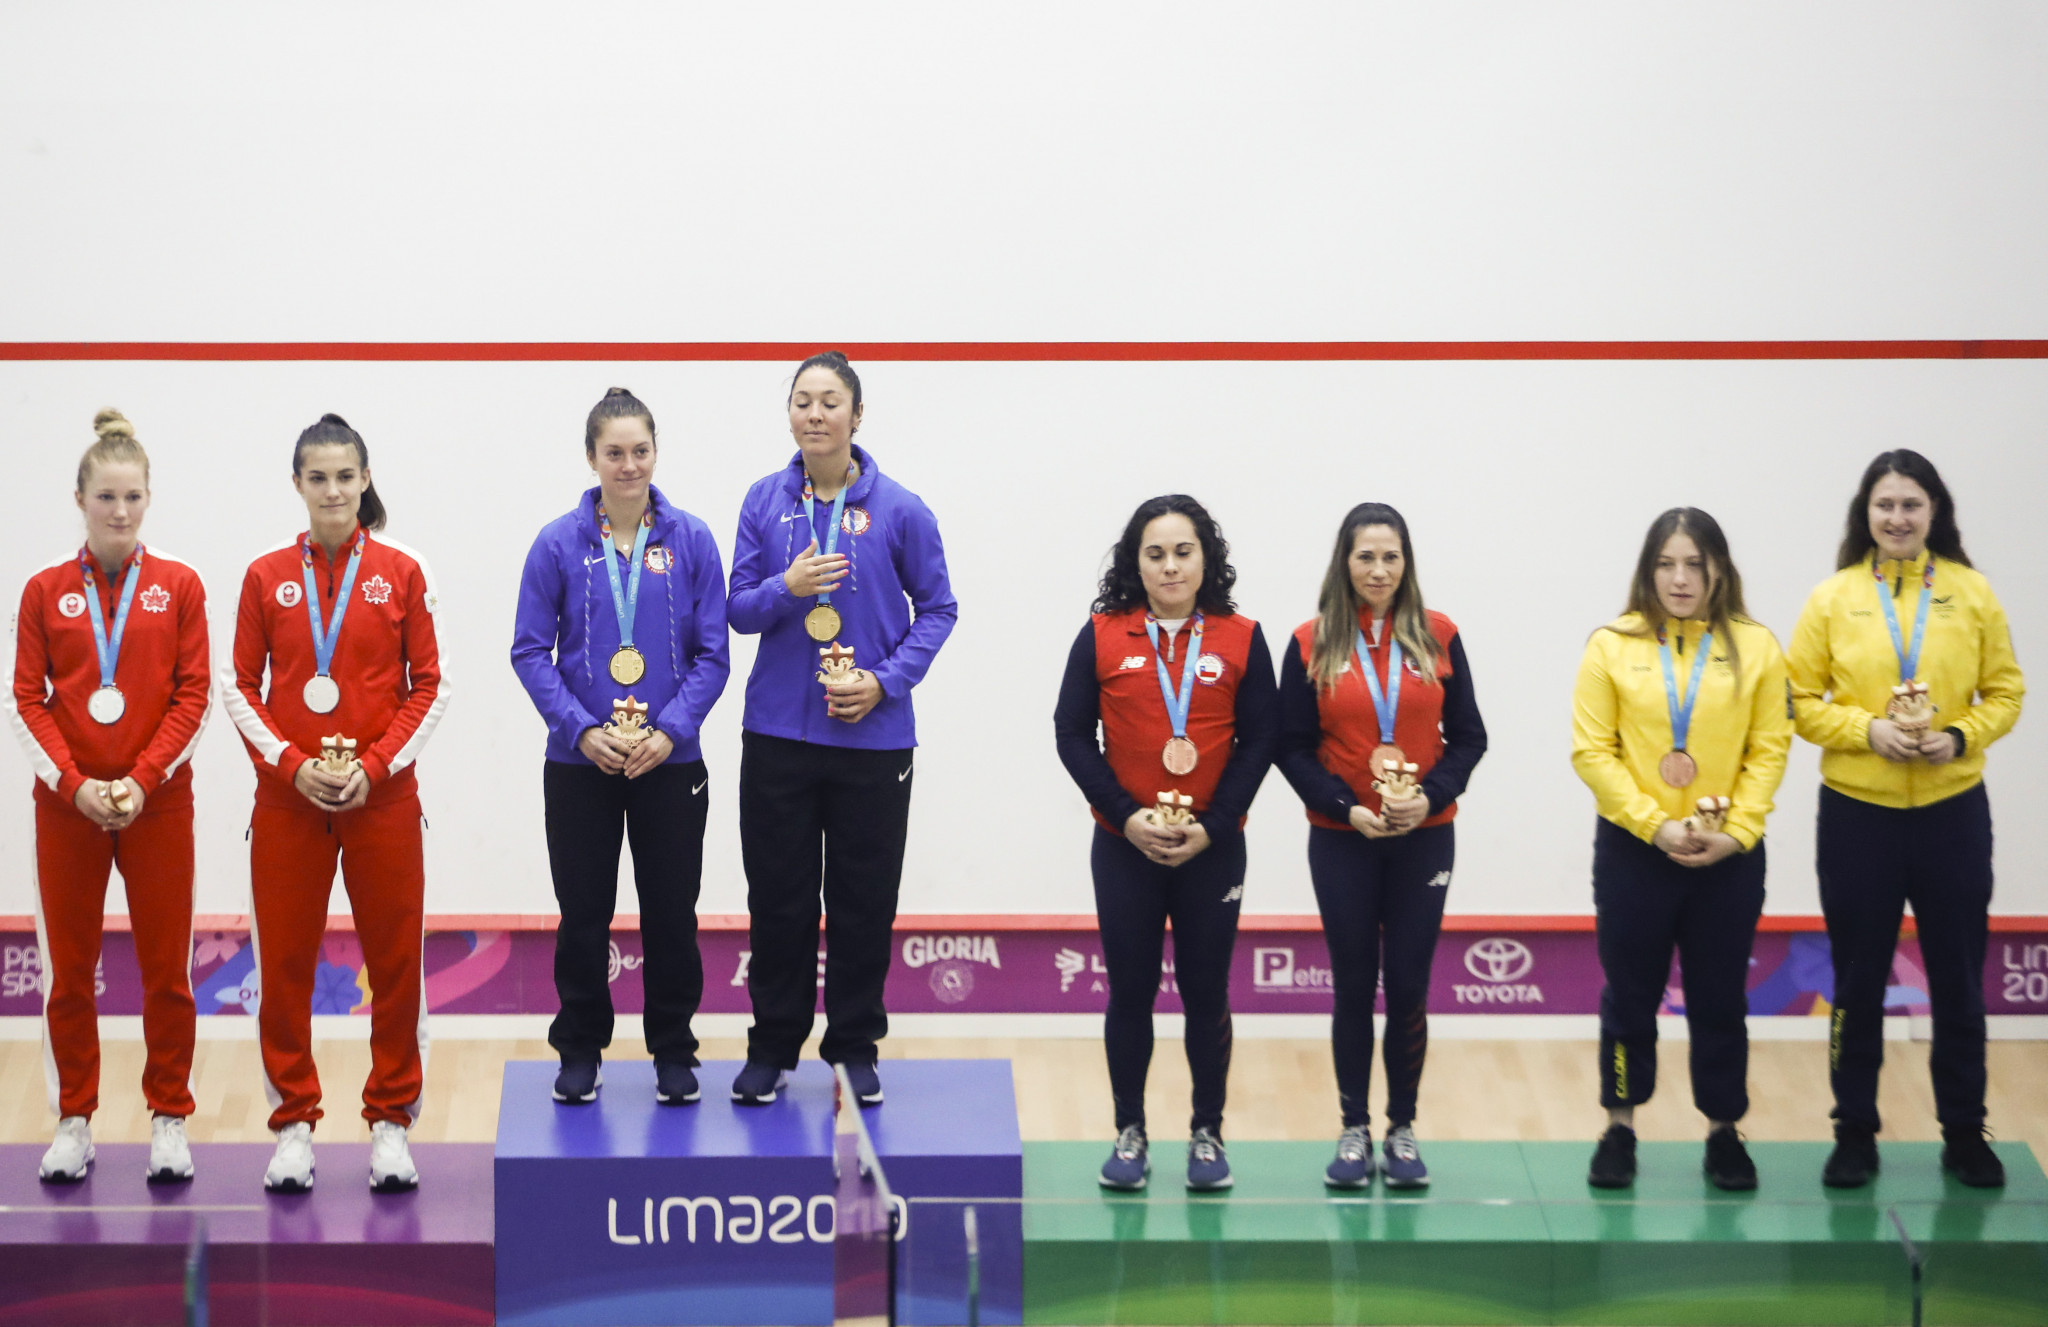 Colombia and Venezuela impress in weightlifting at Lima 2019